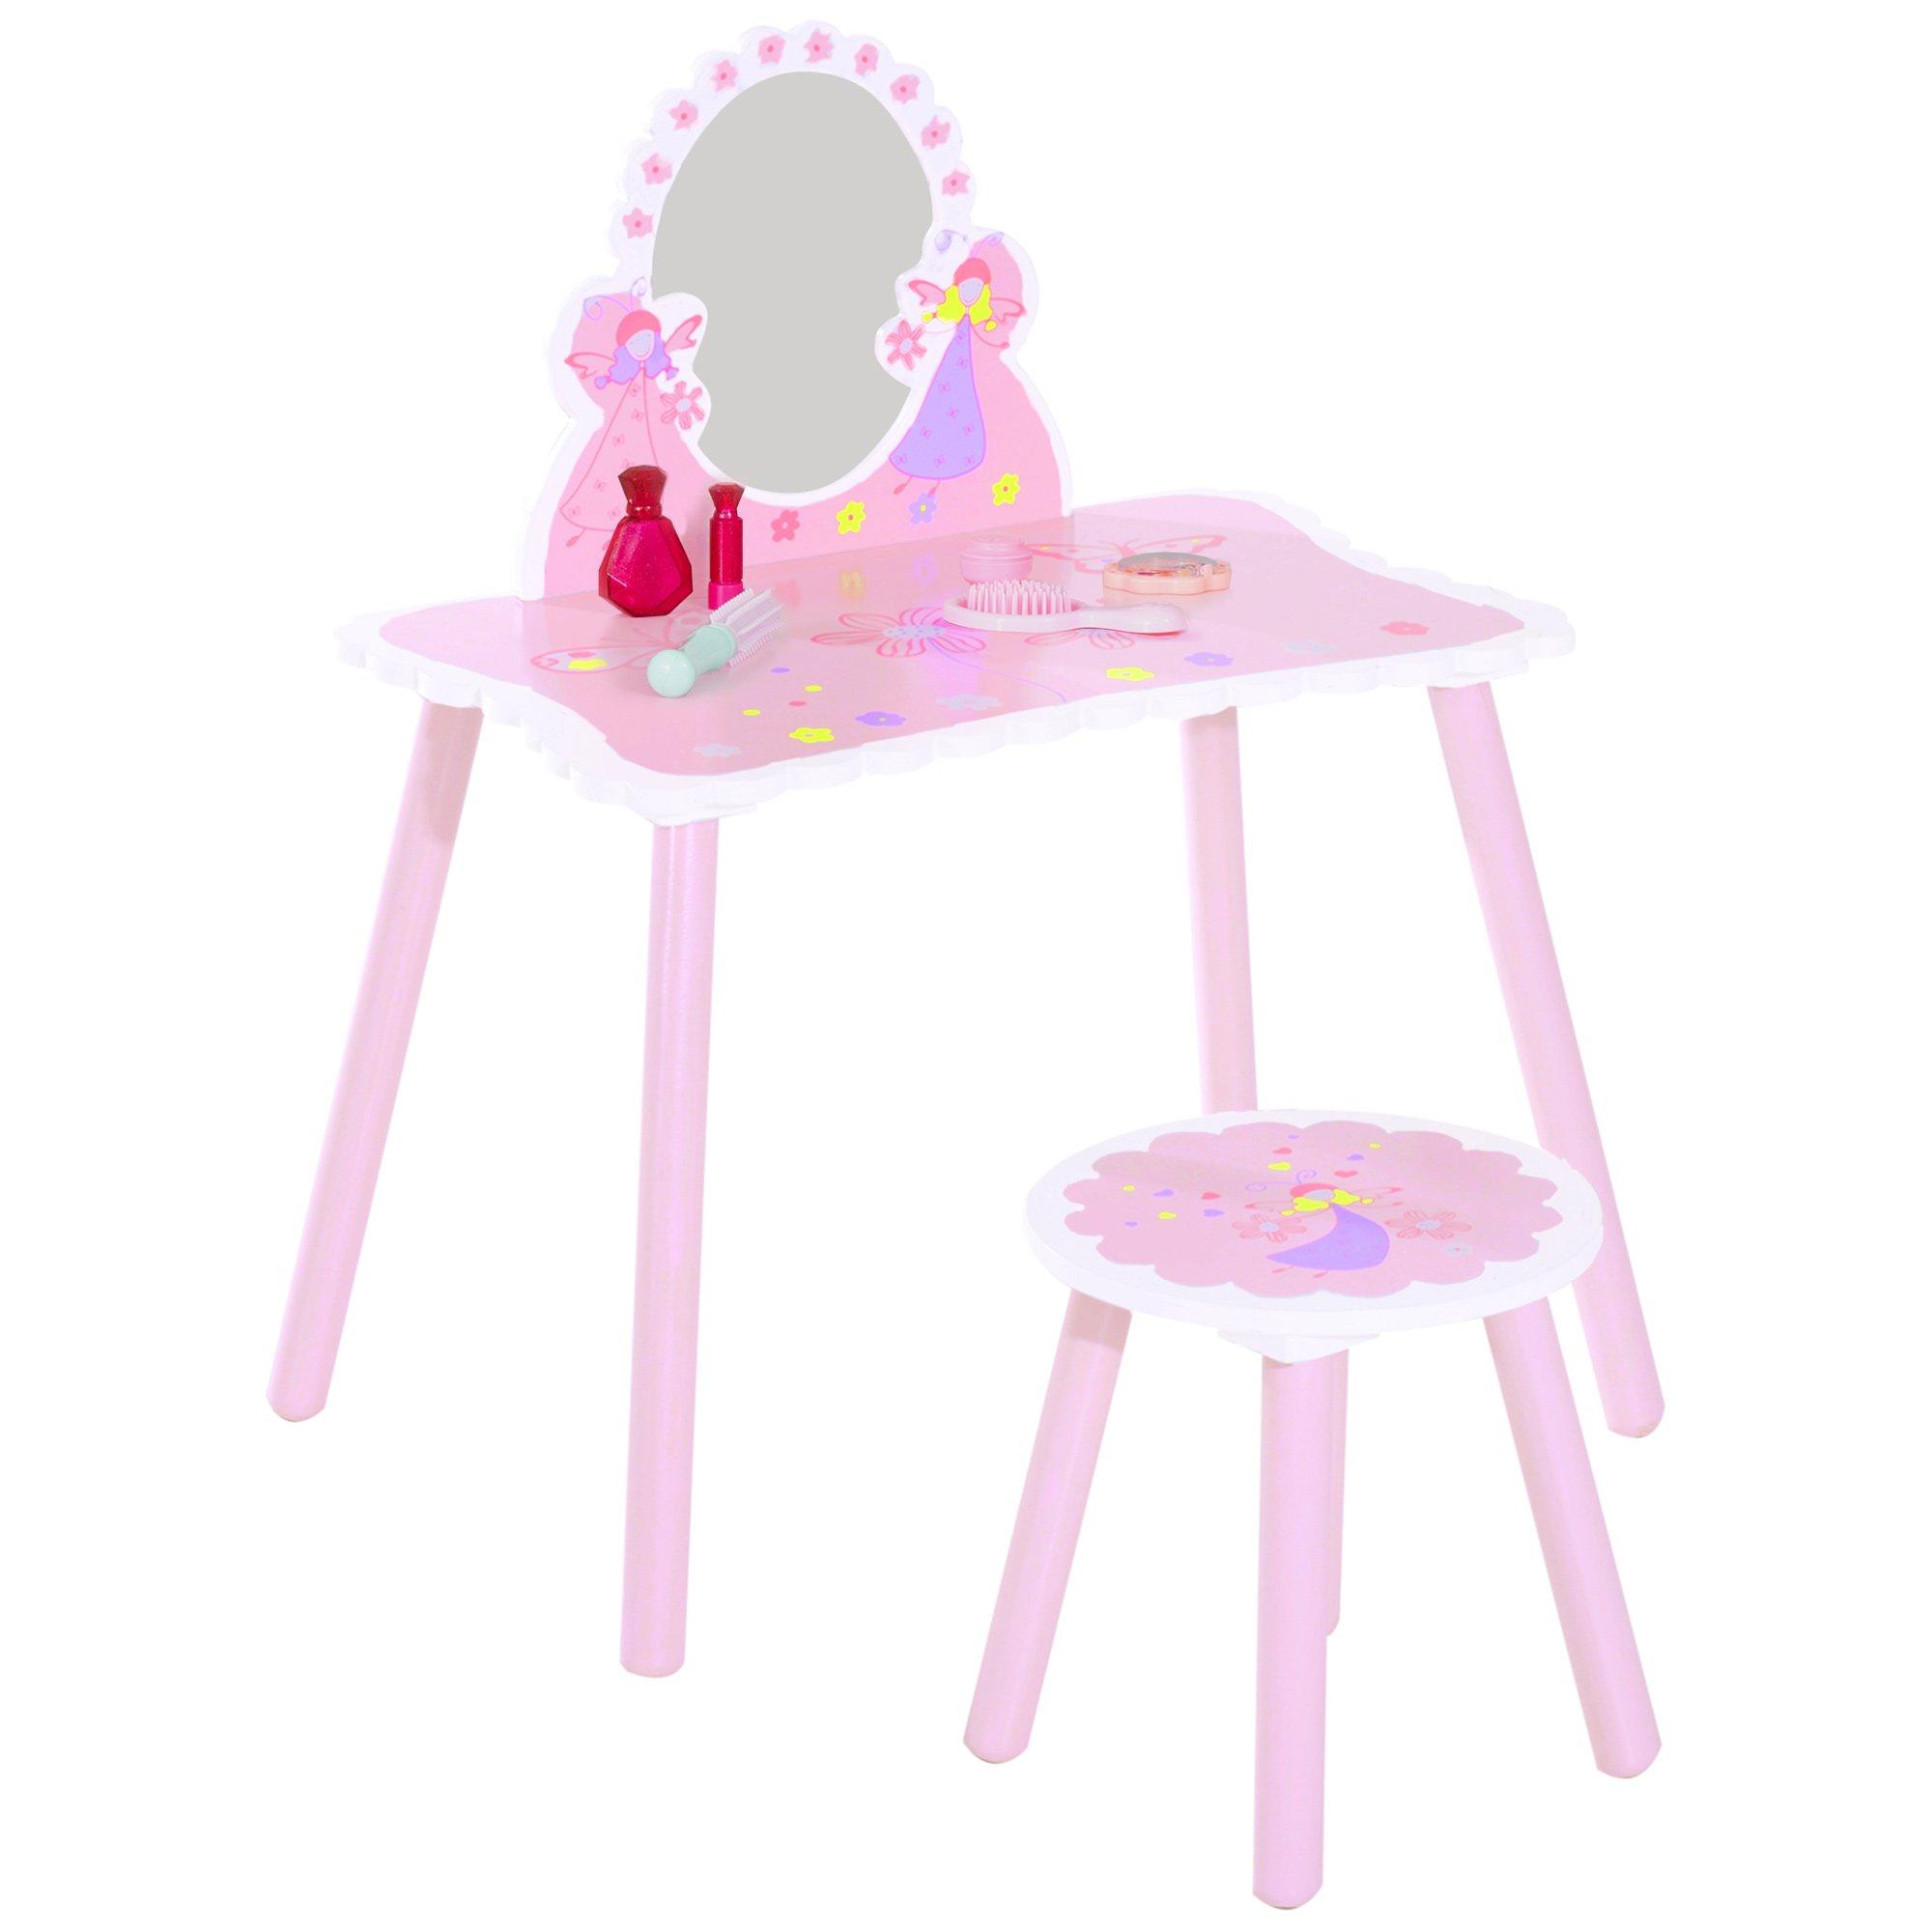 Make Up Play Set Desk Chair Mirror Girls Pink Dressing Table with stool MDF Pink